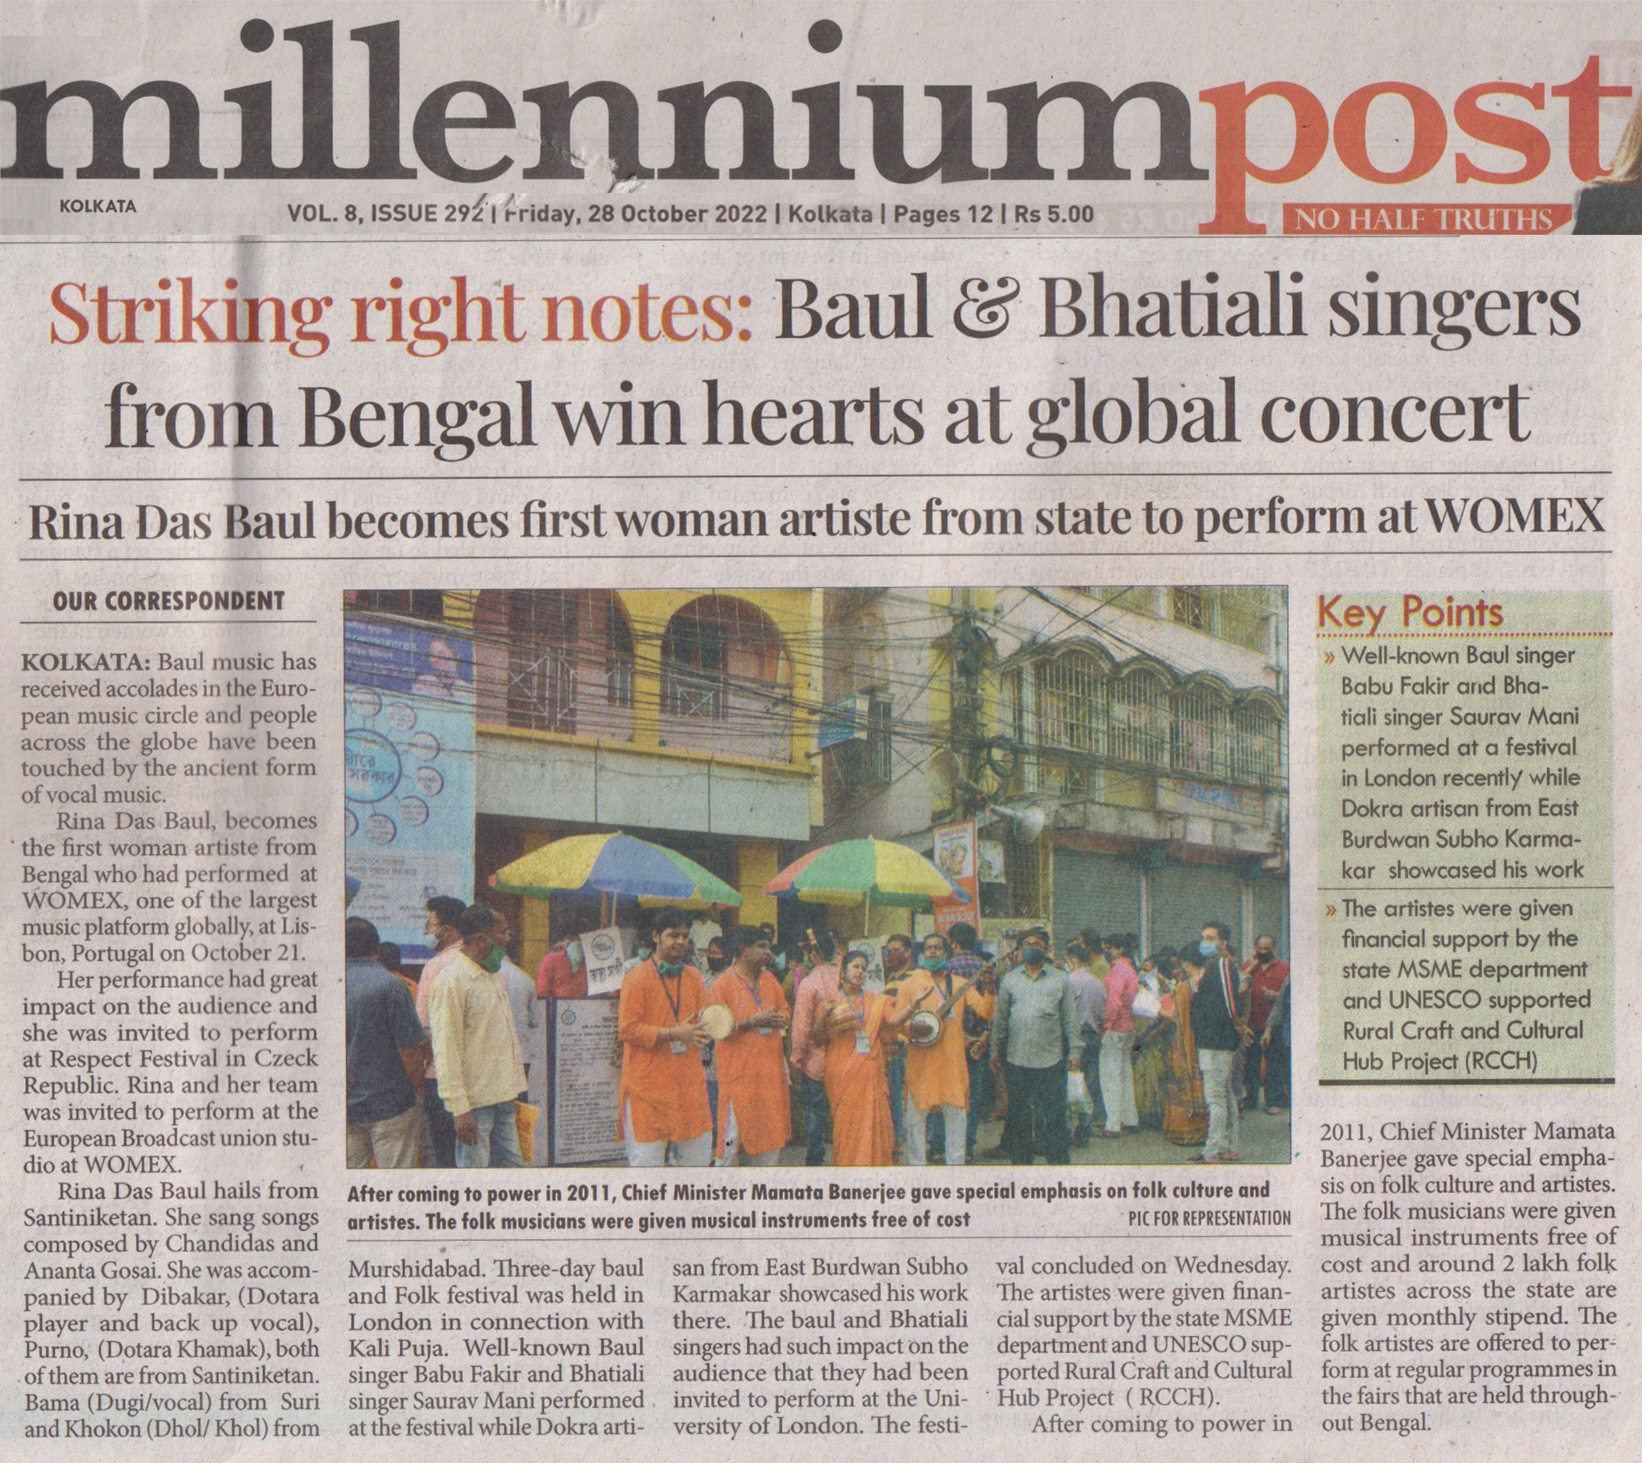 Baul and Bhatiyali singers from Bengal win hearts at global concert